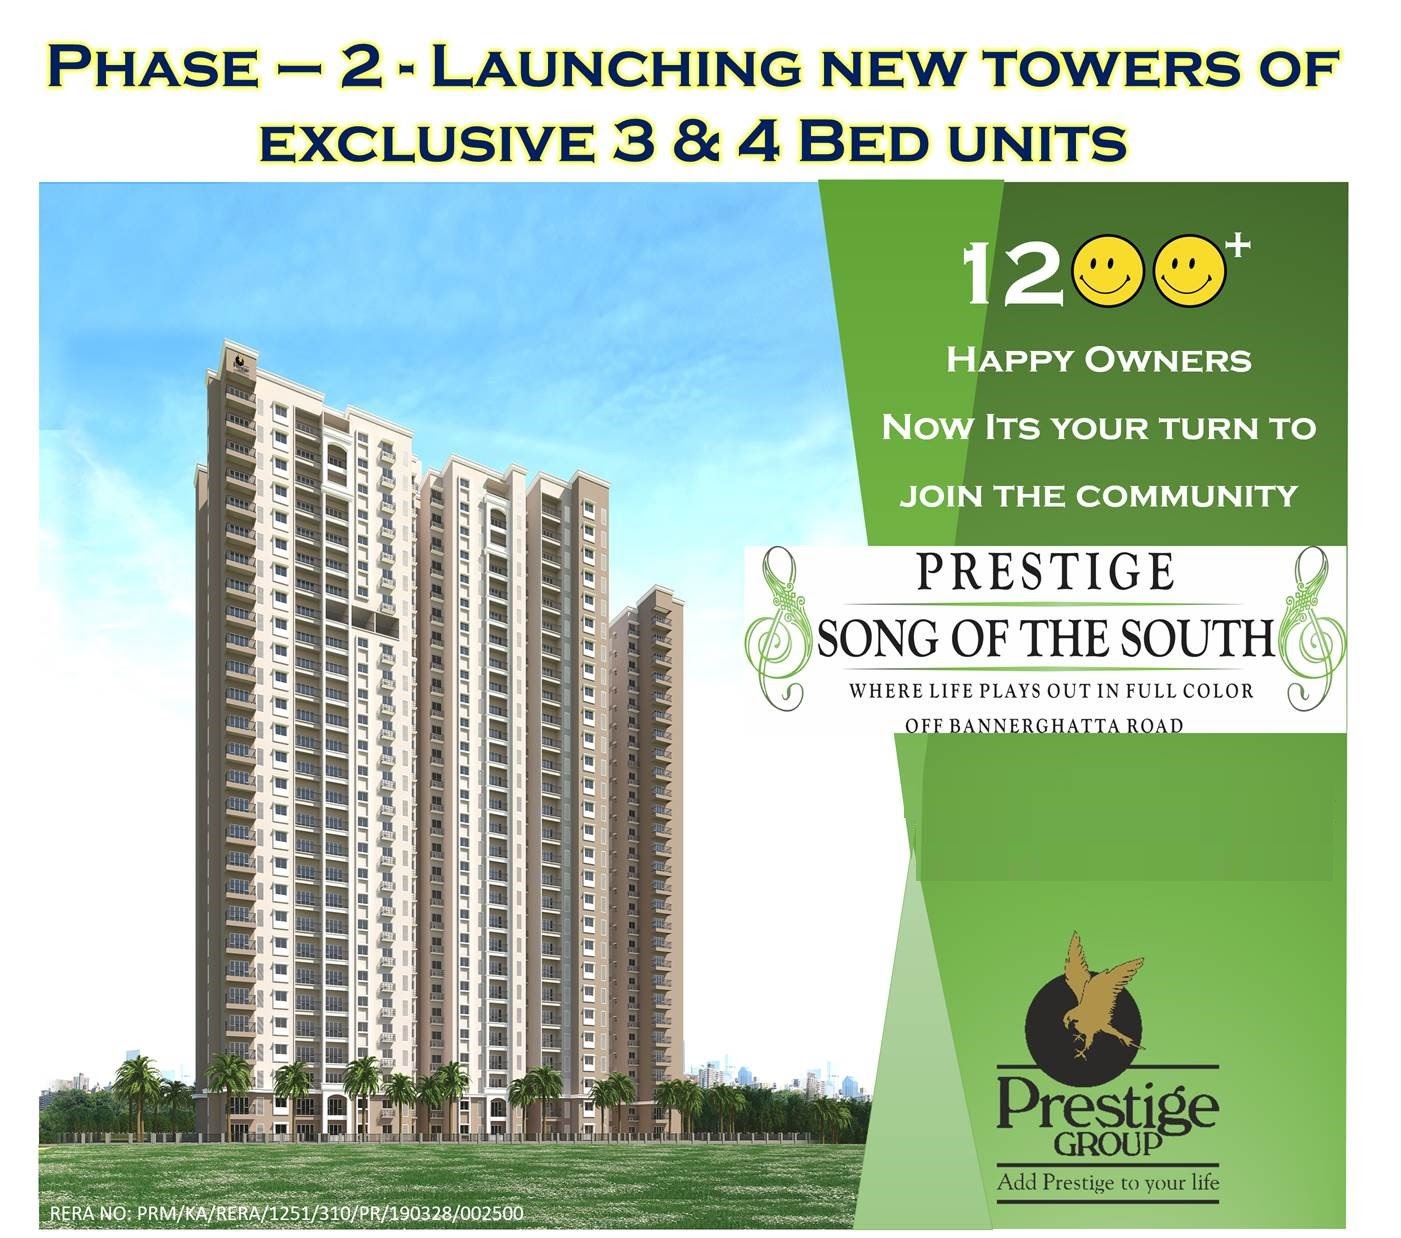 Launching phase 2 exclusive 3 & 4 bed residences at Prestige Song of the South in Bangalore Update